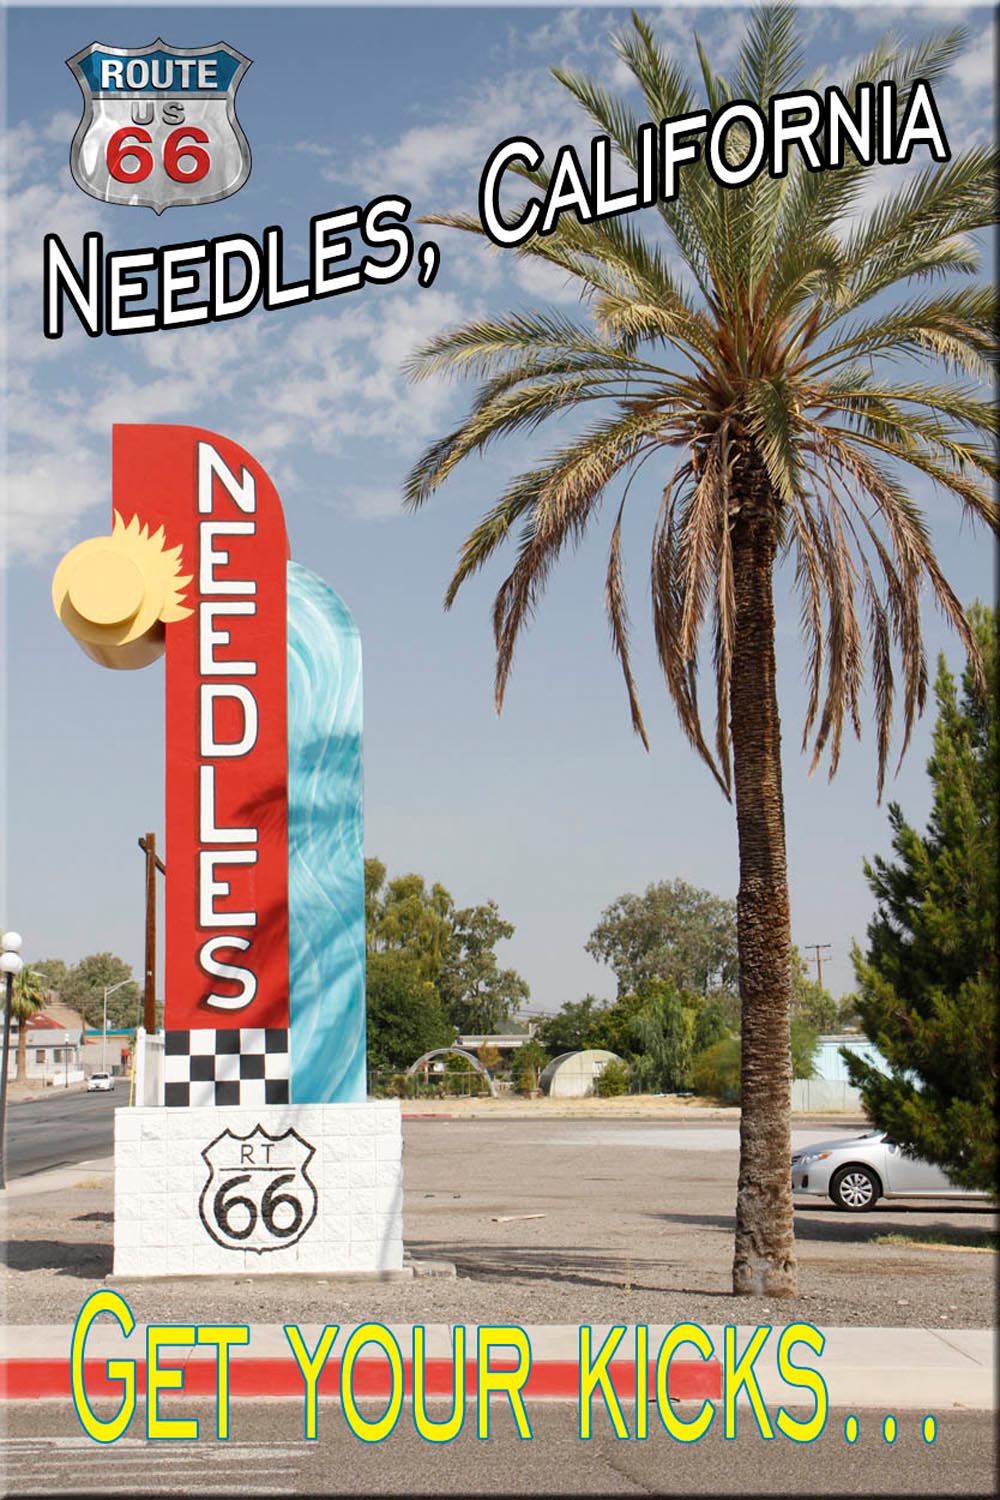 Route 66 Fridge Magnet featuring an image in Needles, CA